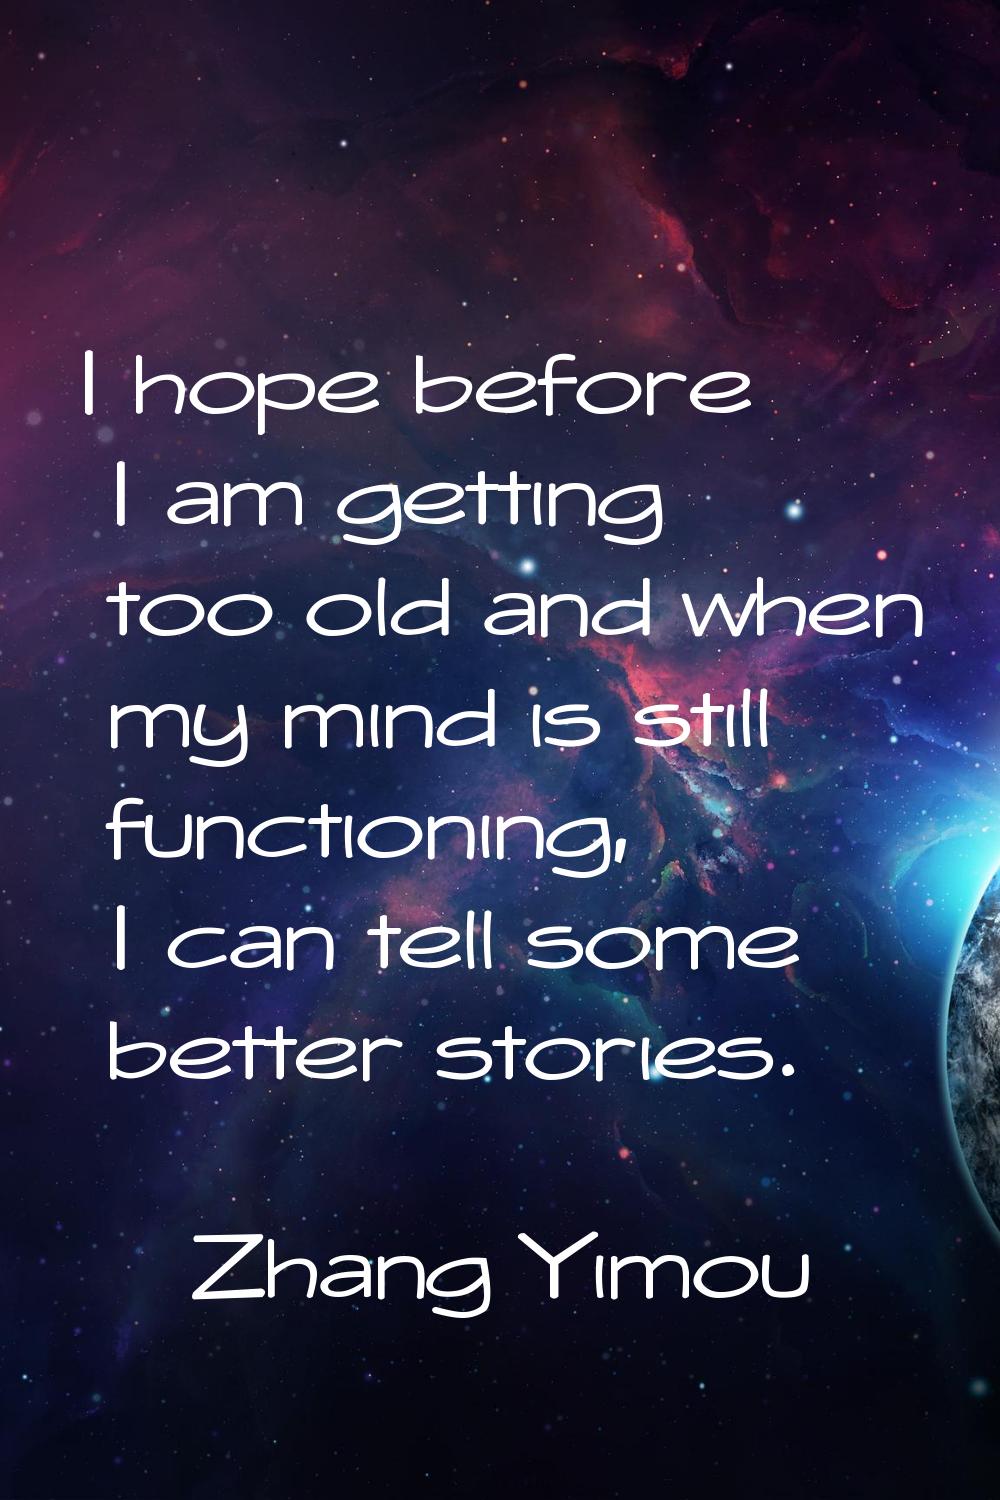 I hope before I am getting too old and when my mind is still functioning, I can tell some better st